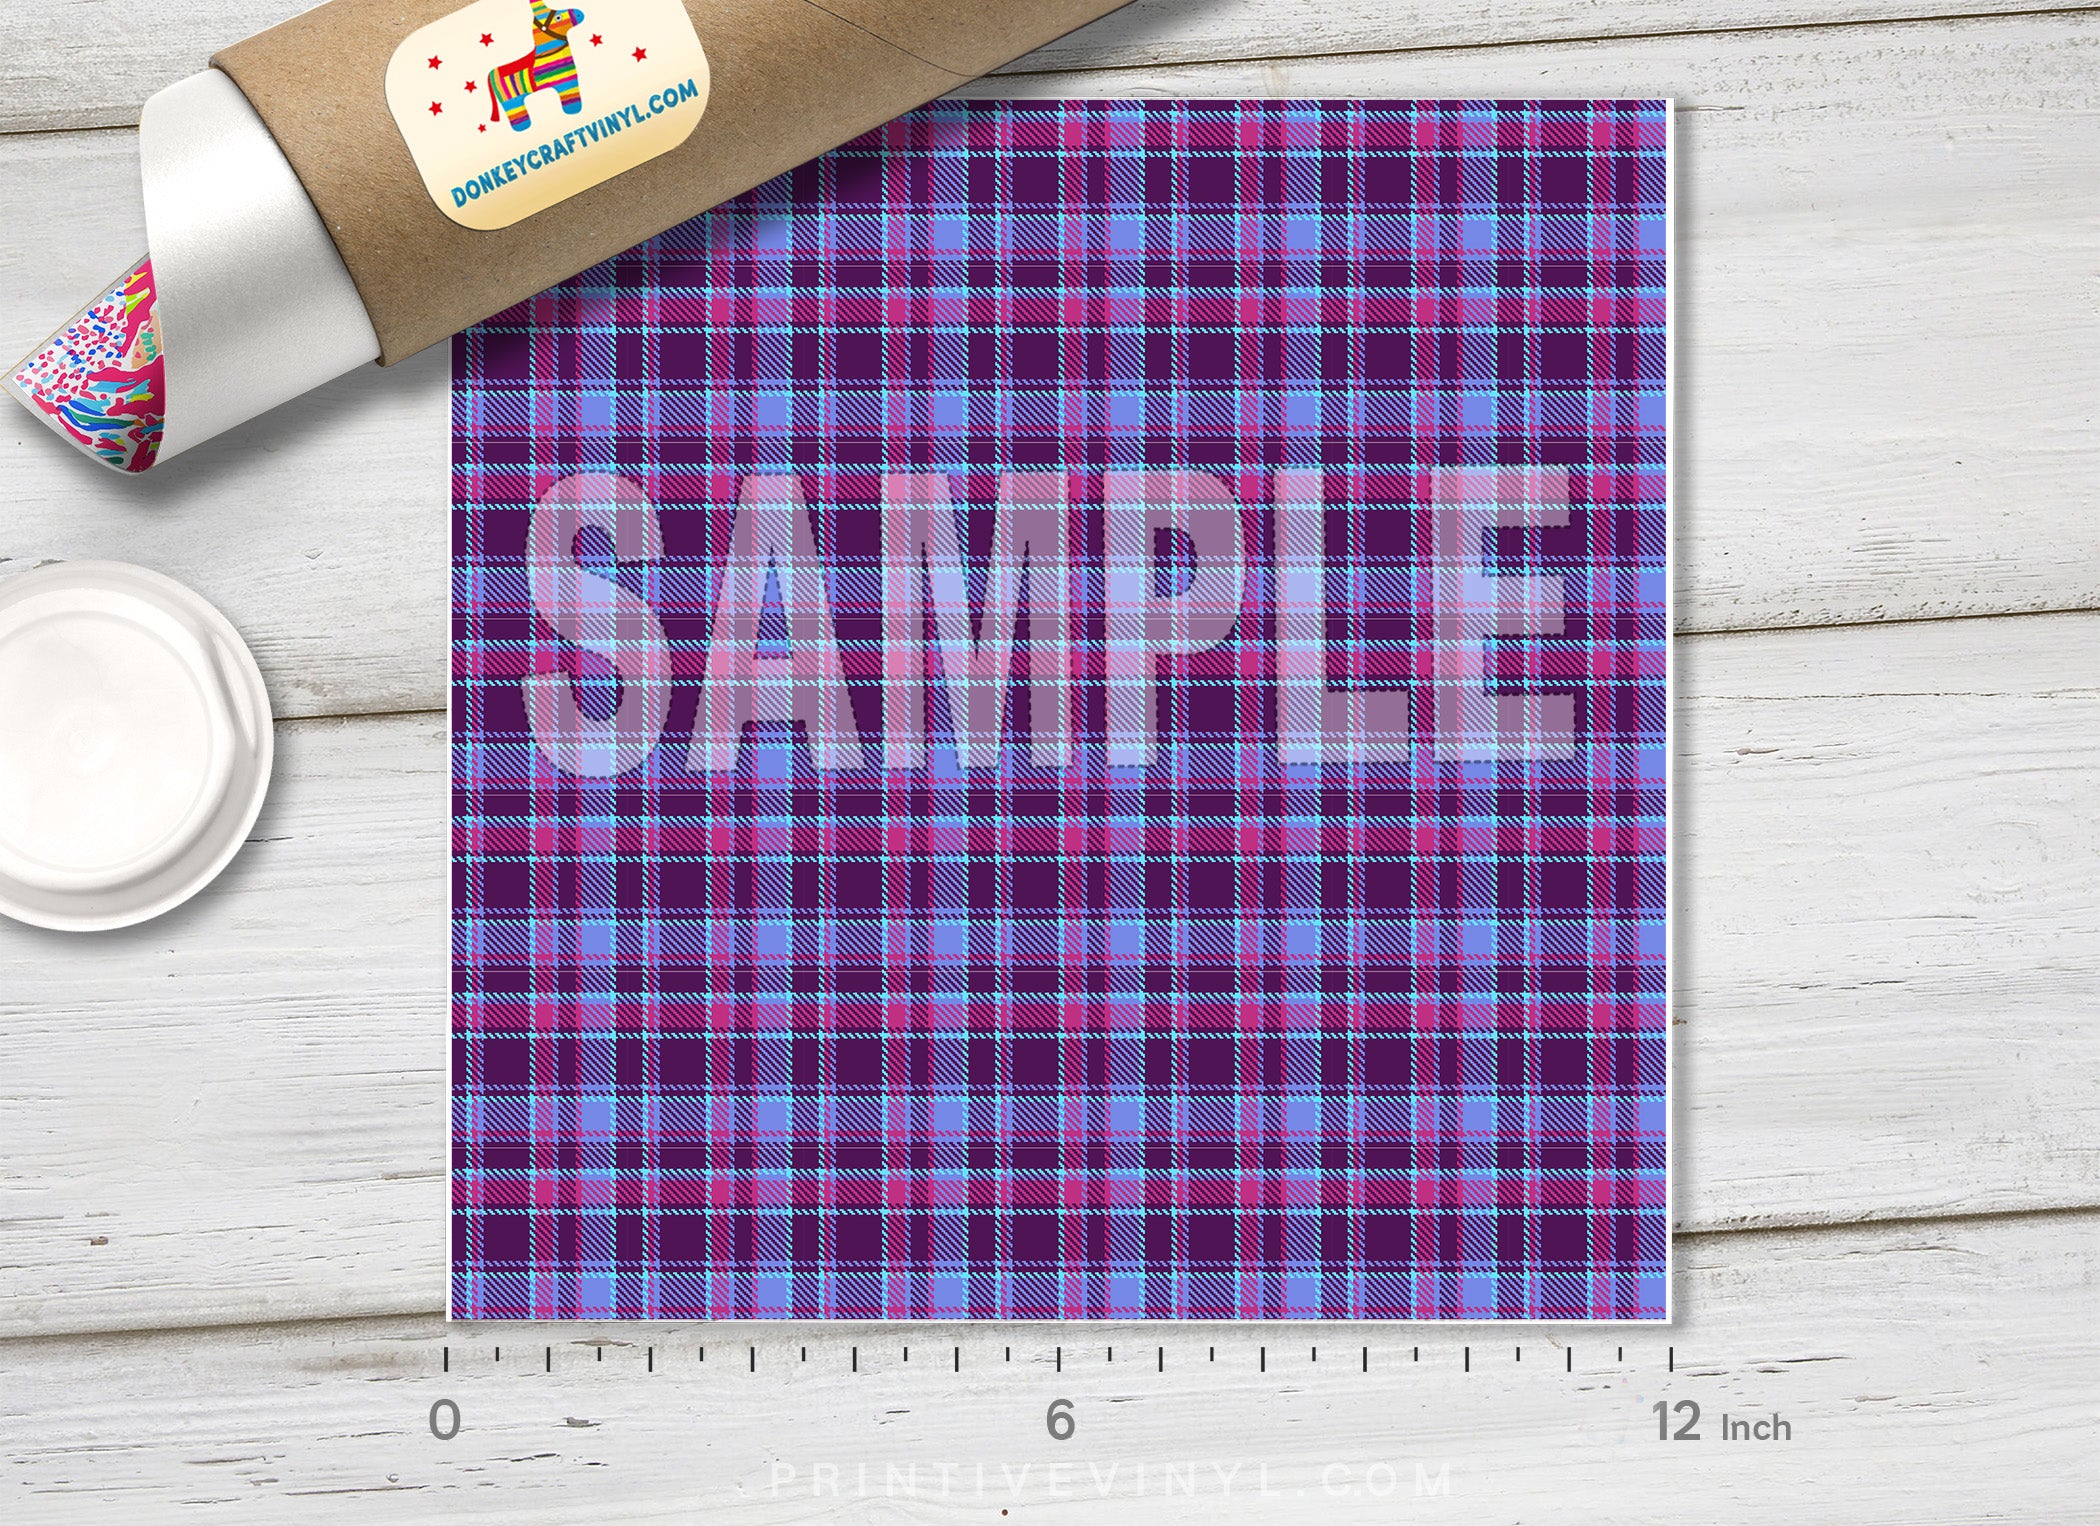 Colorful Checker Plaid Patterned HTV 715